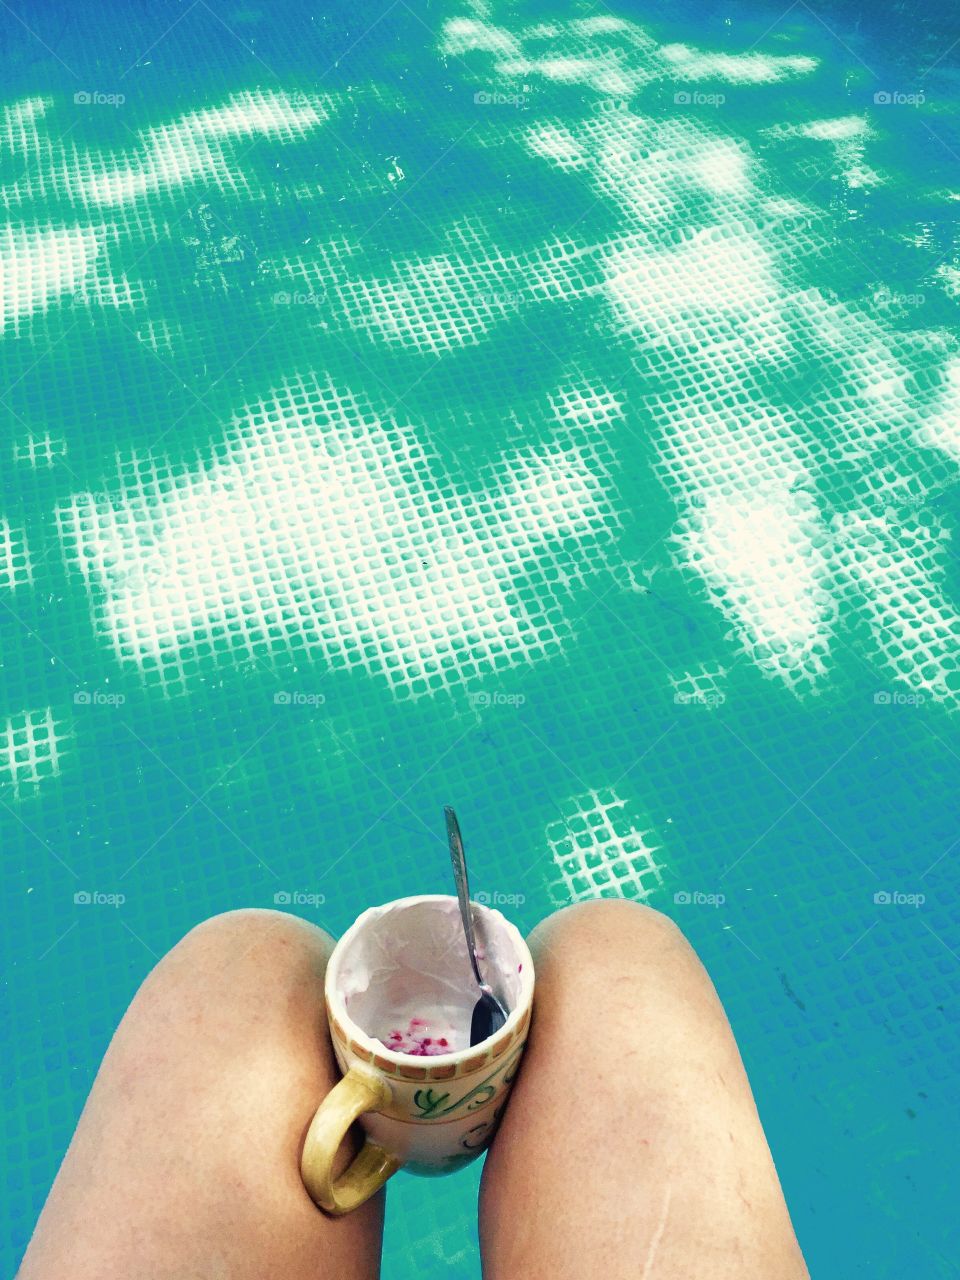 Legs in swimming pool with a cup between them and snack in cup.